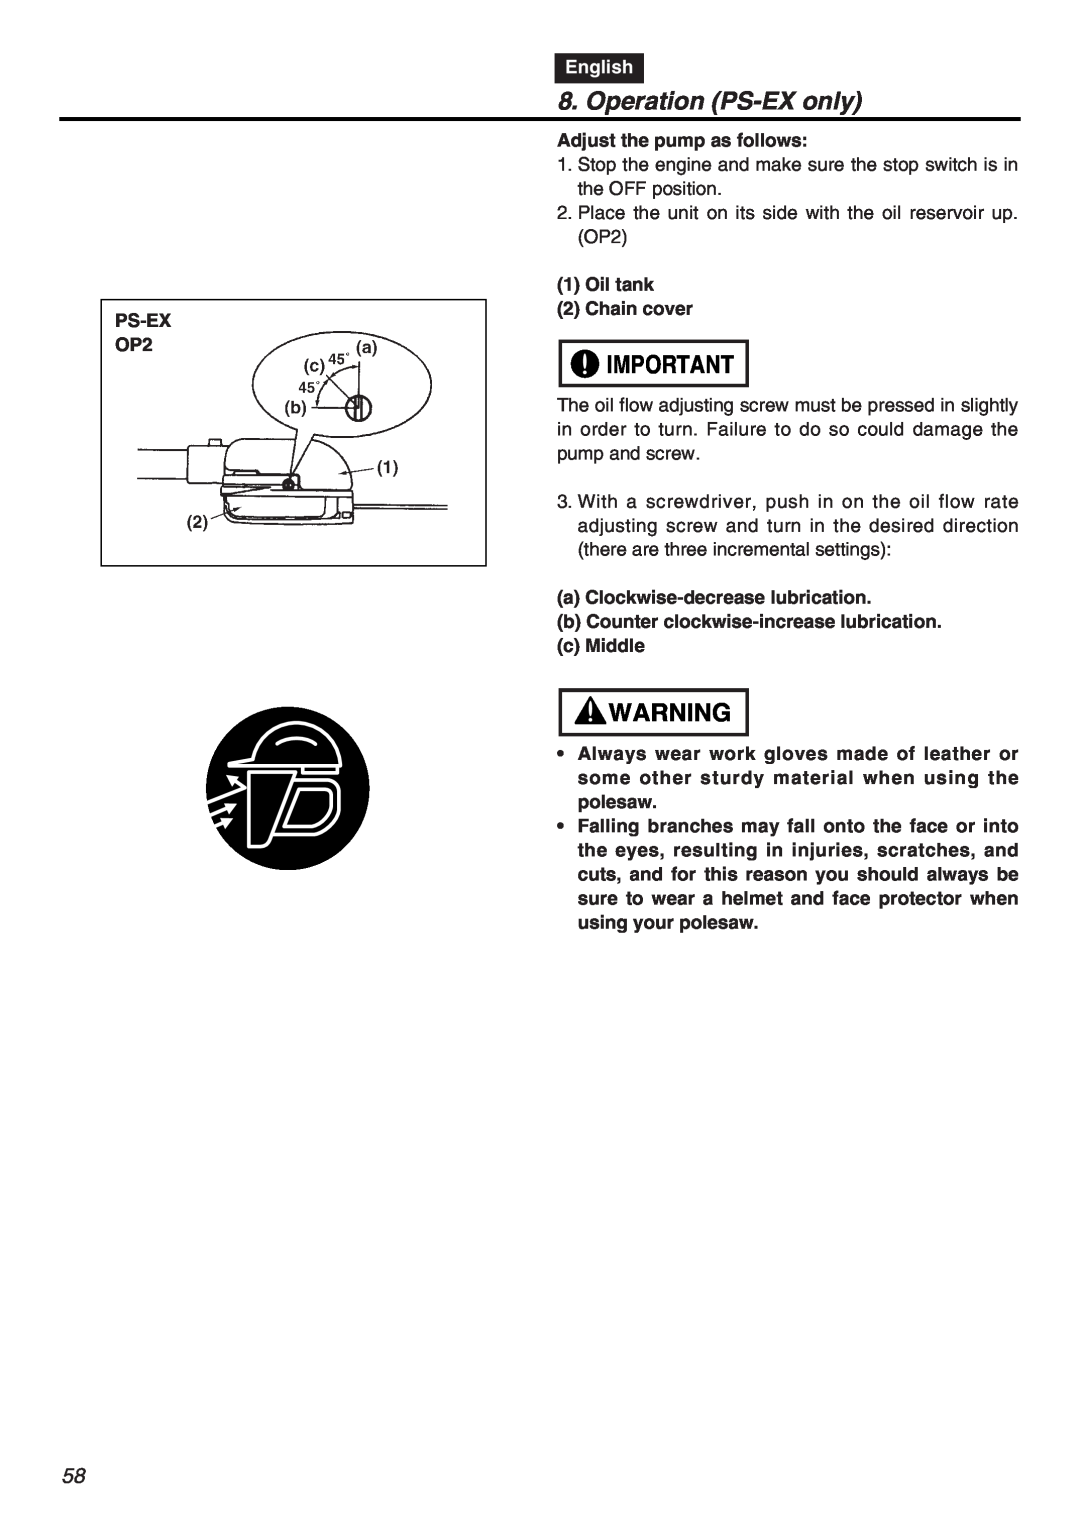 RedMax EXZ2401S-PH-CA manual Operation PS-EX only, PS-EX OP2, English 